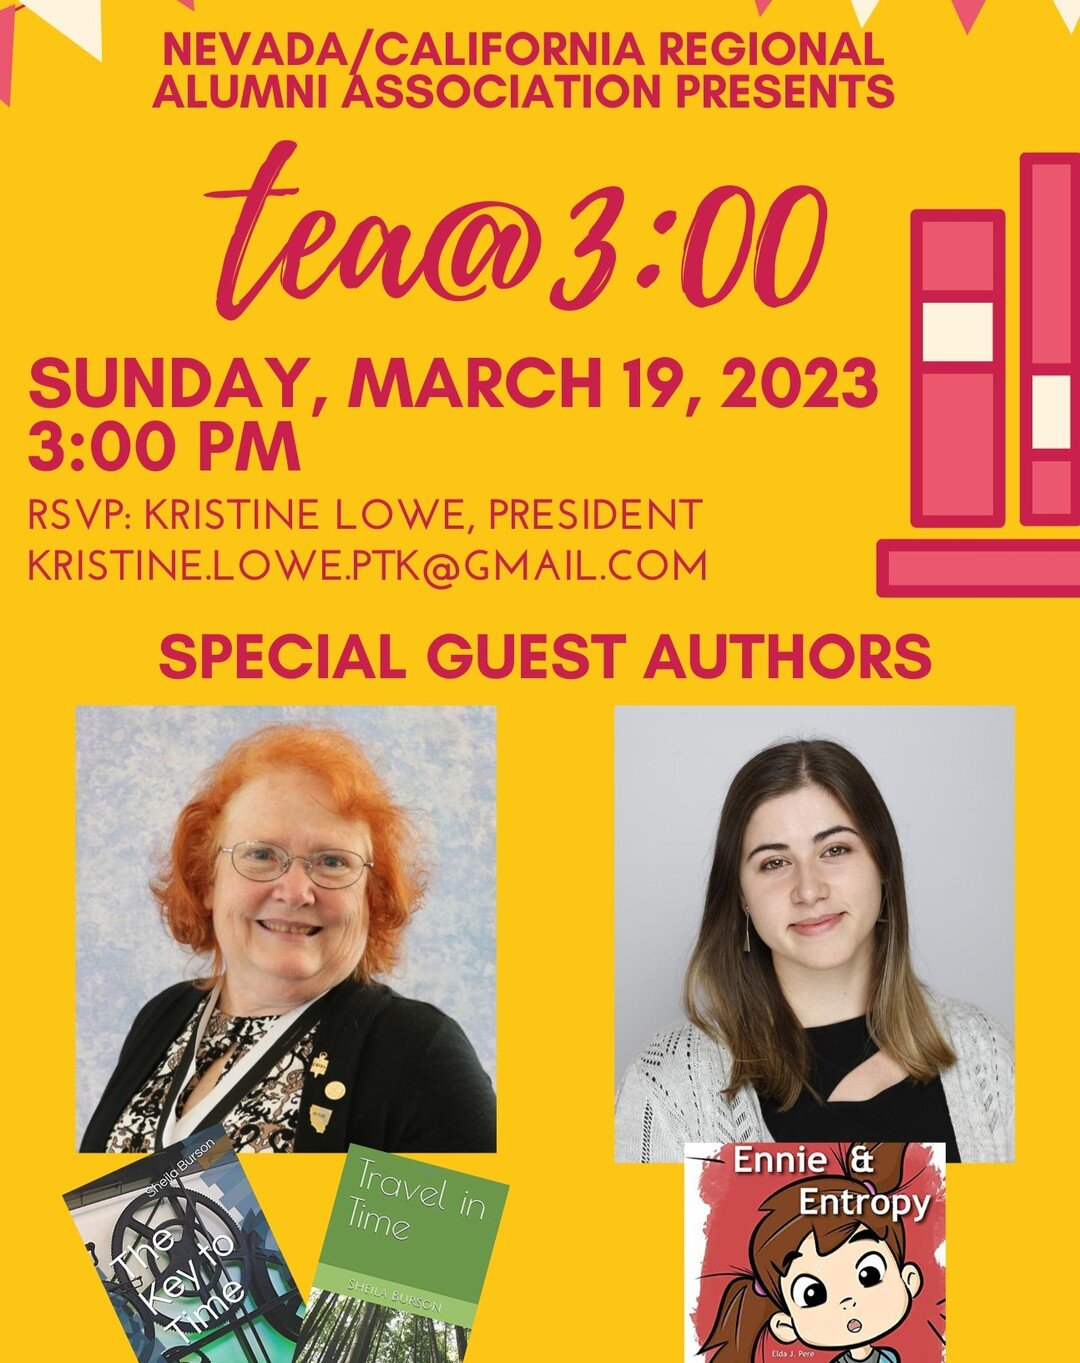 Is writing a book or article on your wishlist? Hear about how two authors and PTK legends, Sheila Burson and Elda Pere, wrote and published their books!

Our Alumni Association is kicking off the popular one-hour Tea@3:00 virtual event series for the